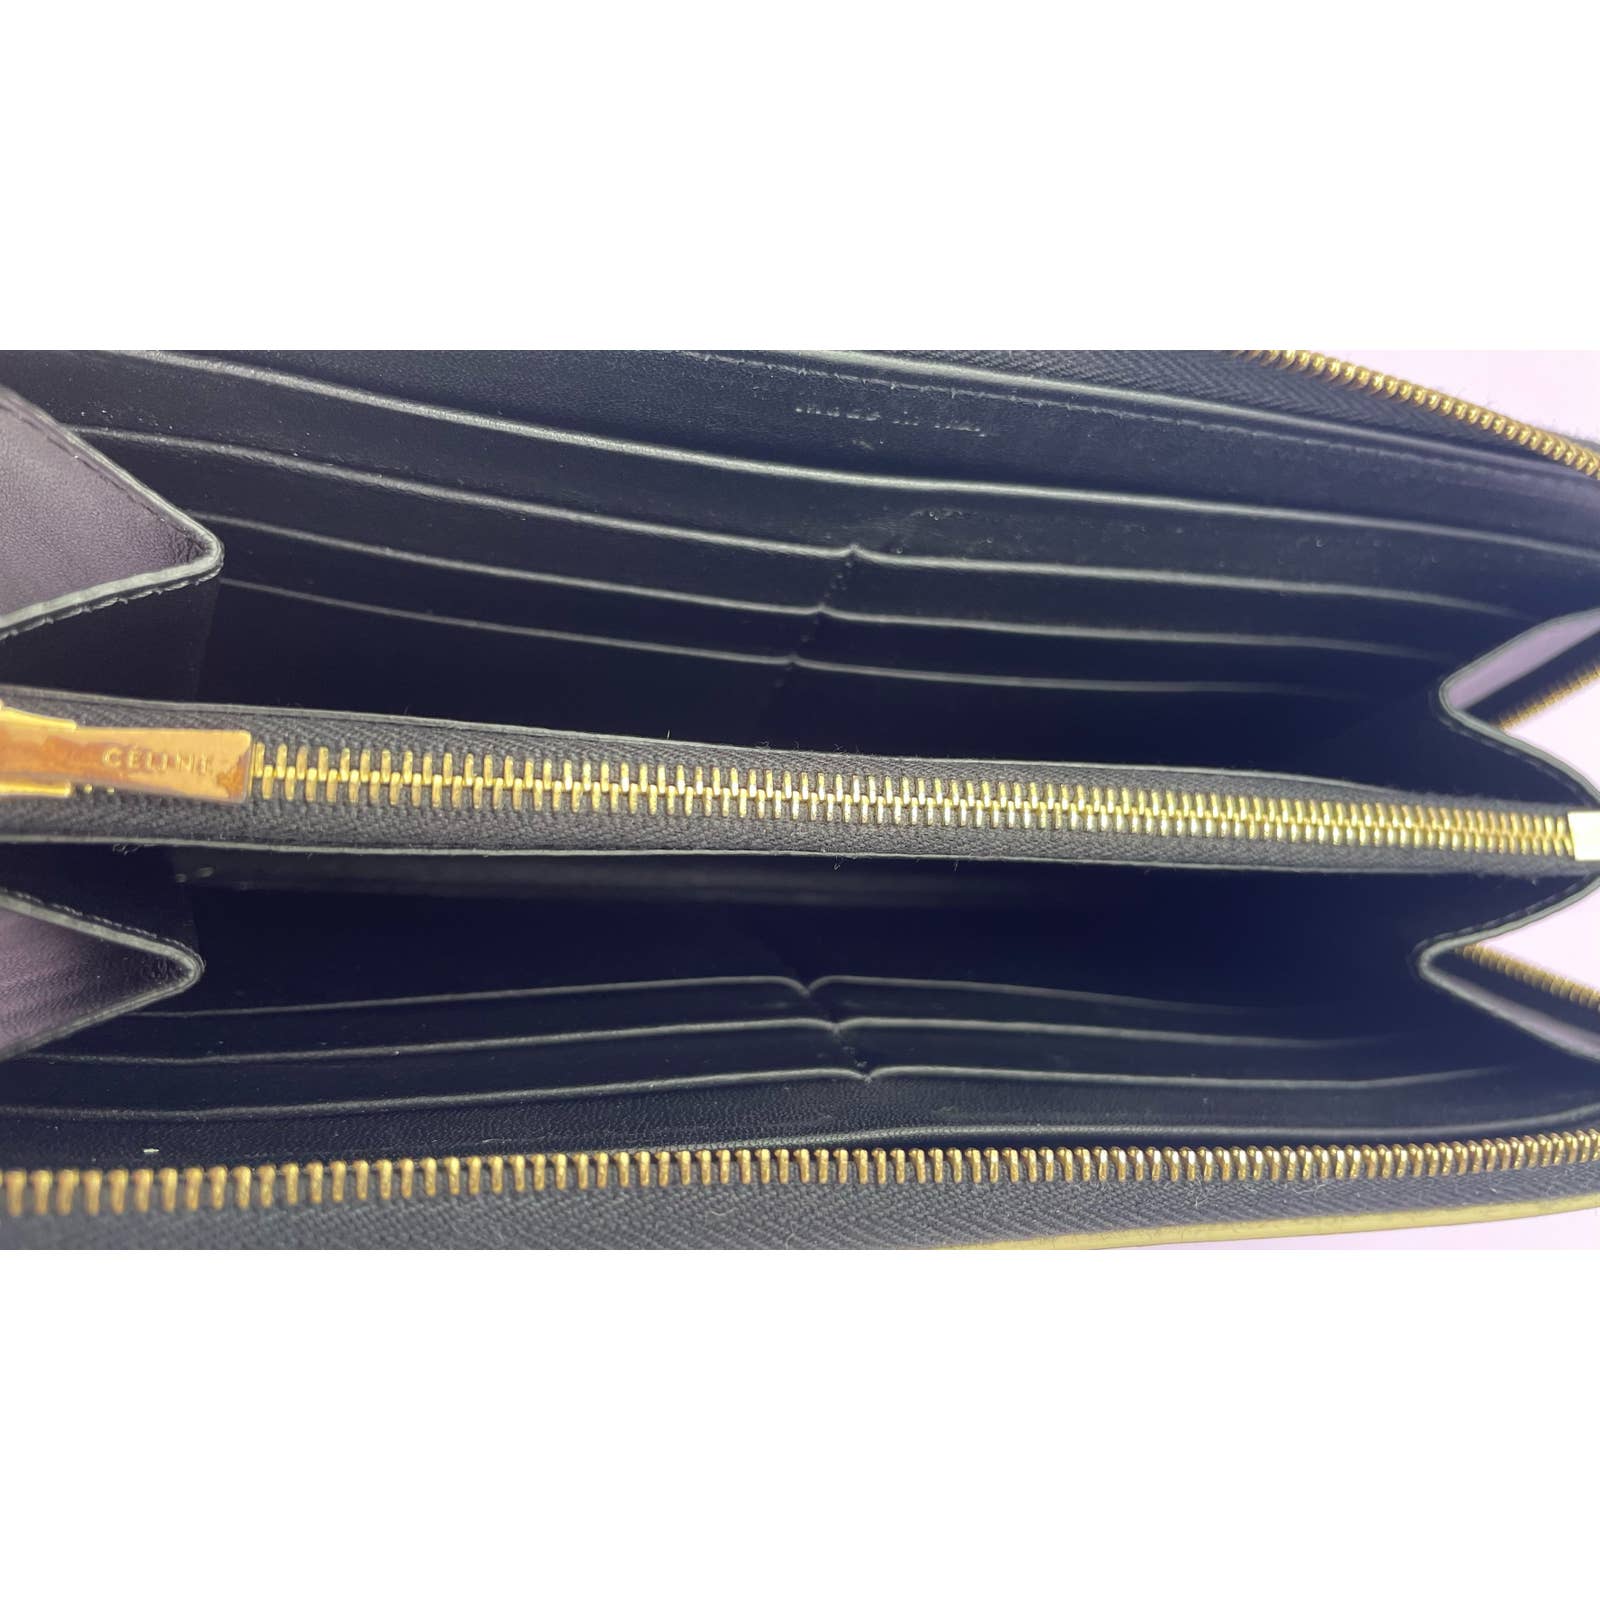 The image shows the inside of a Celine Celine Alphabet Wallet Gold with a gold zipper. The black patent leather wallet has several card slots on both sides and a central compartment for storing items like cash or coins. The zipper closure and the wallet's edges have a clean and neatly finished look.